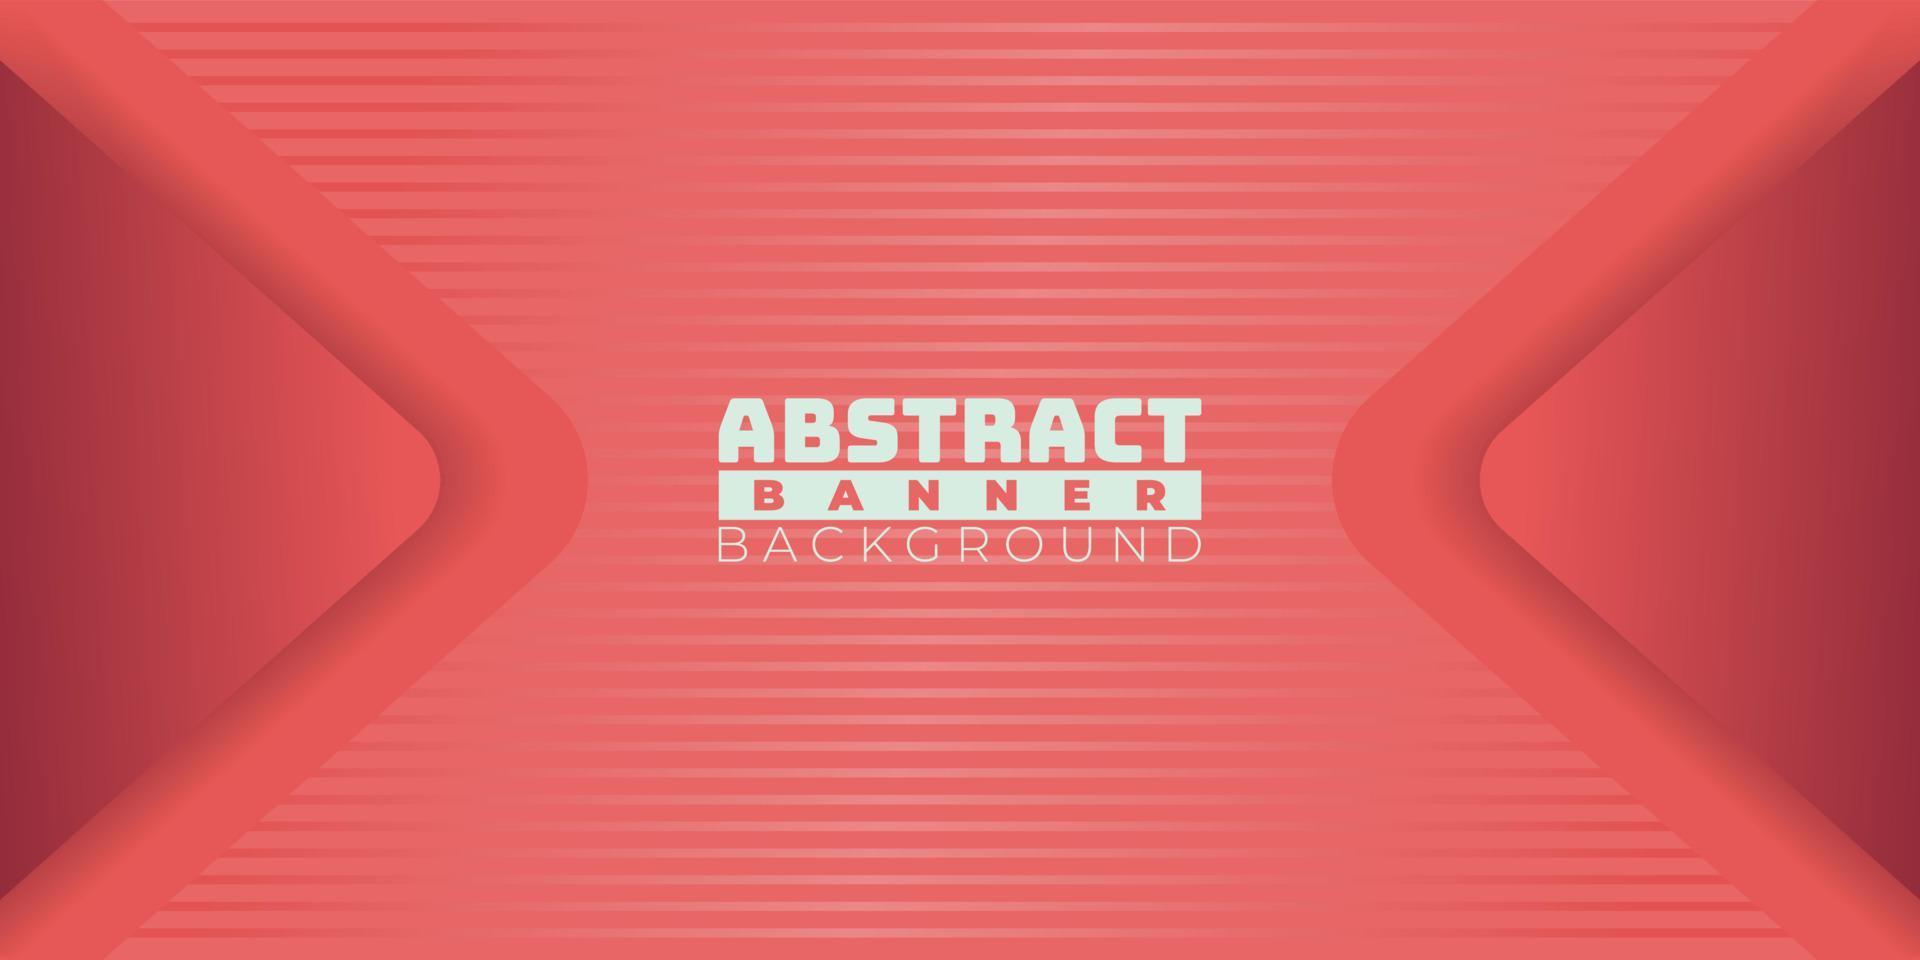 abstract banner background with red color, good for banner, flyer etc. vector illustration